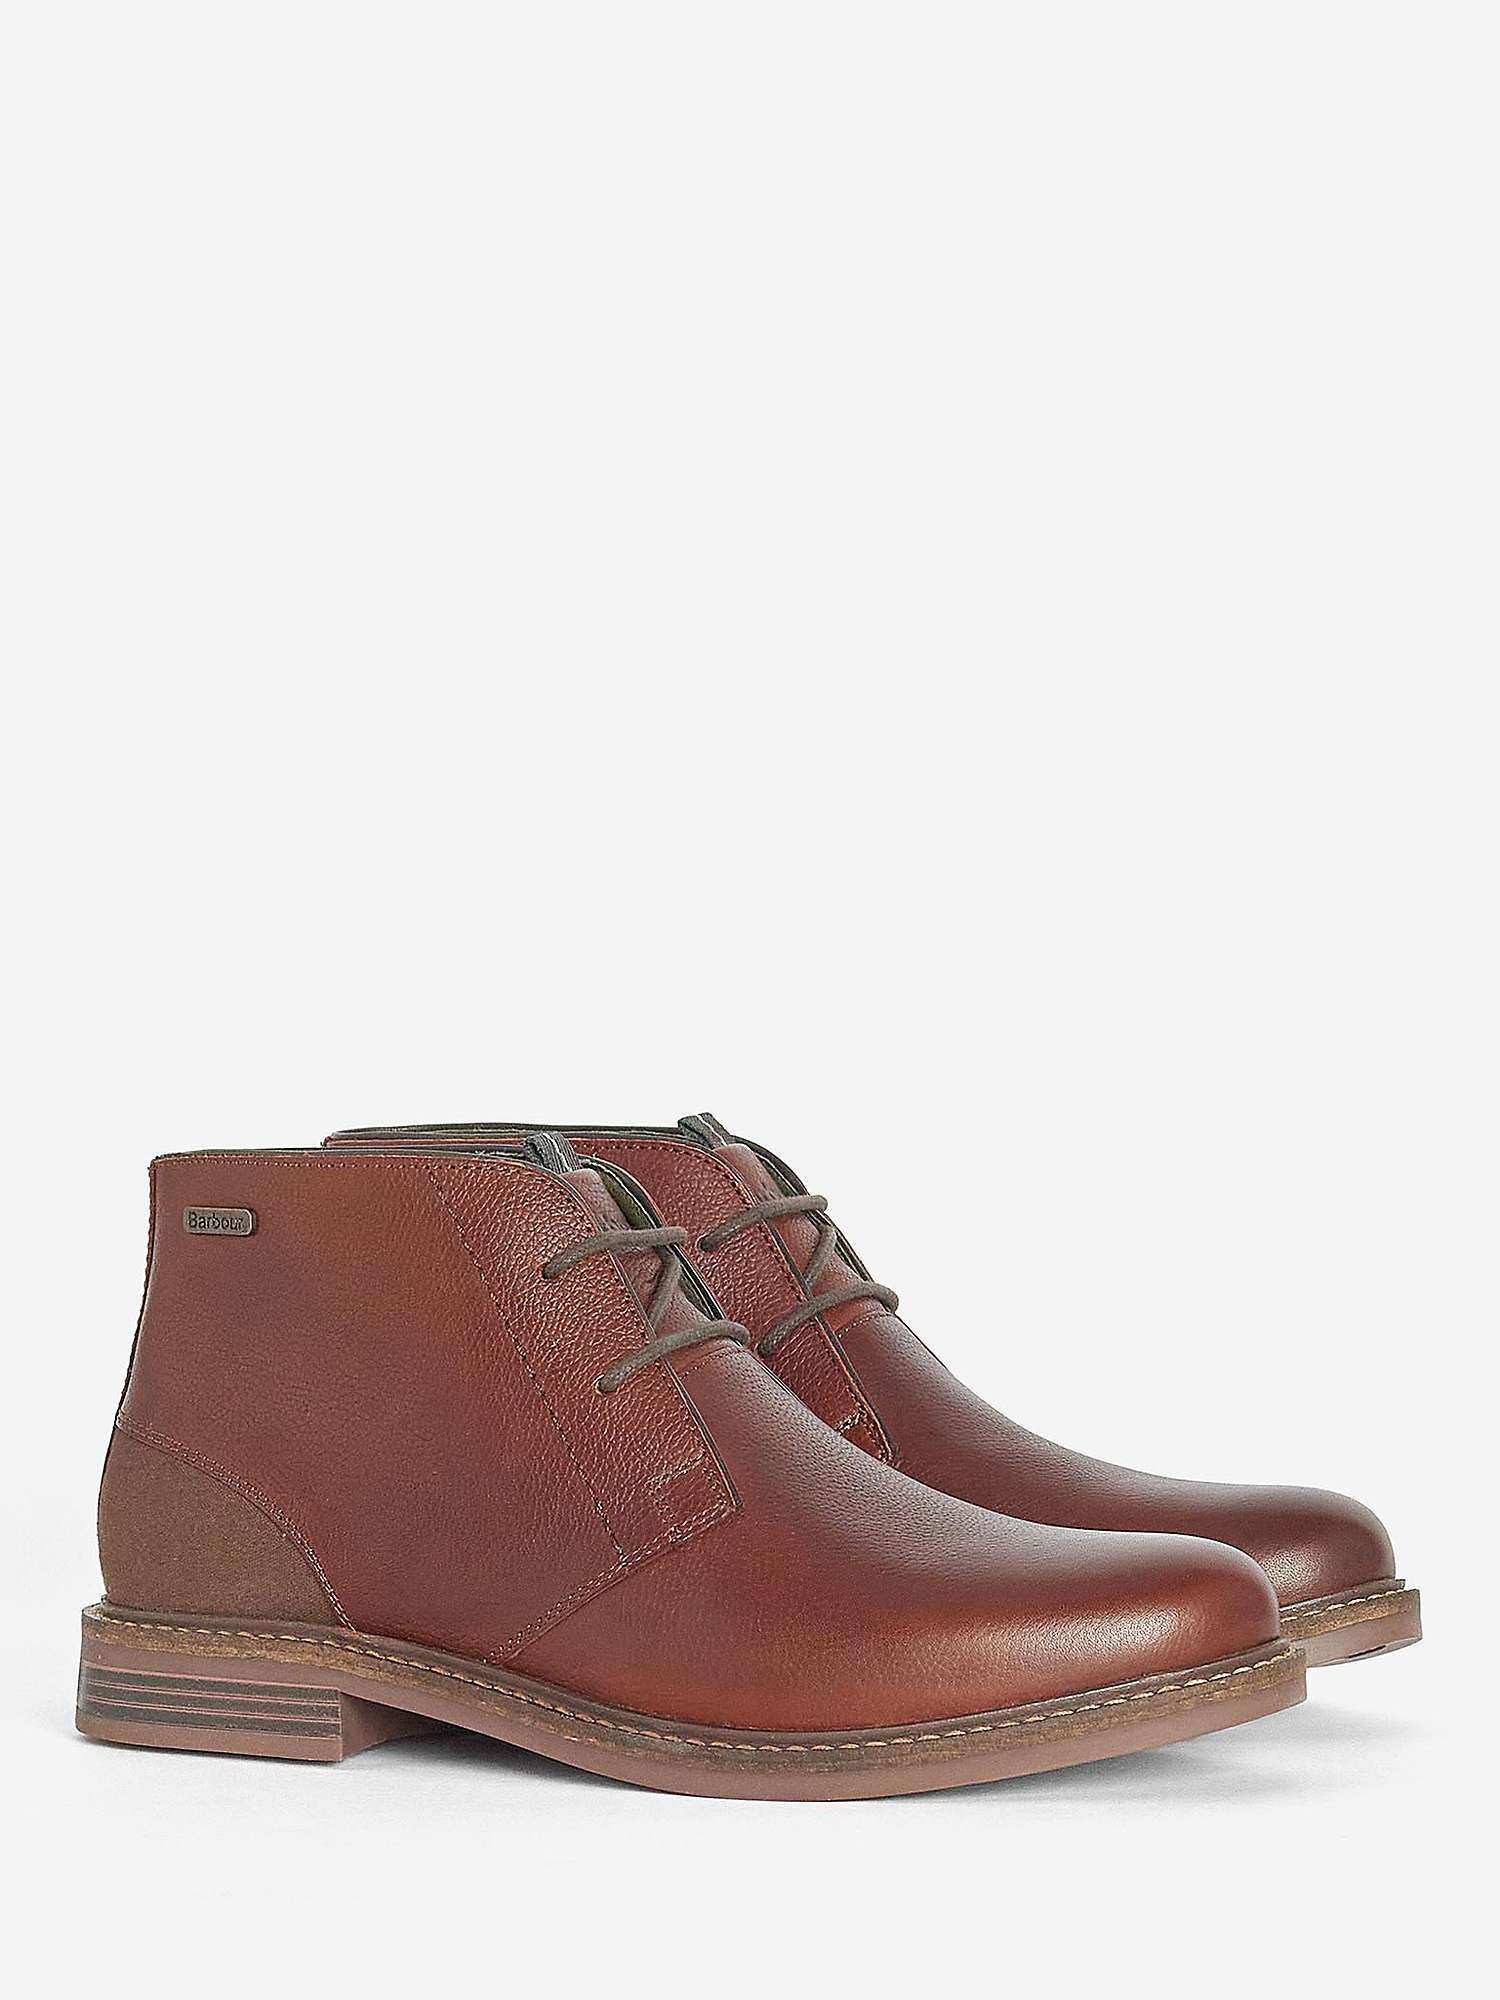 Barbour Redhead Suede Chukka Boots, Teak at John Lewis & Partners